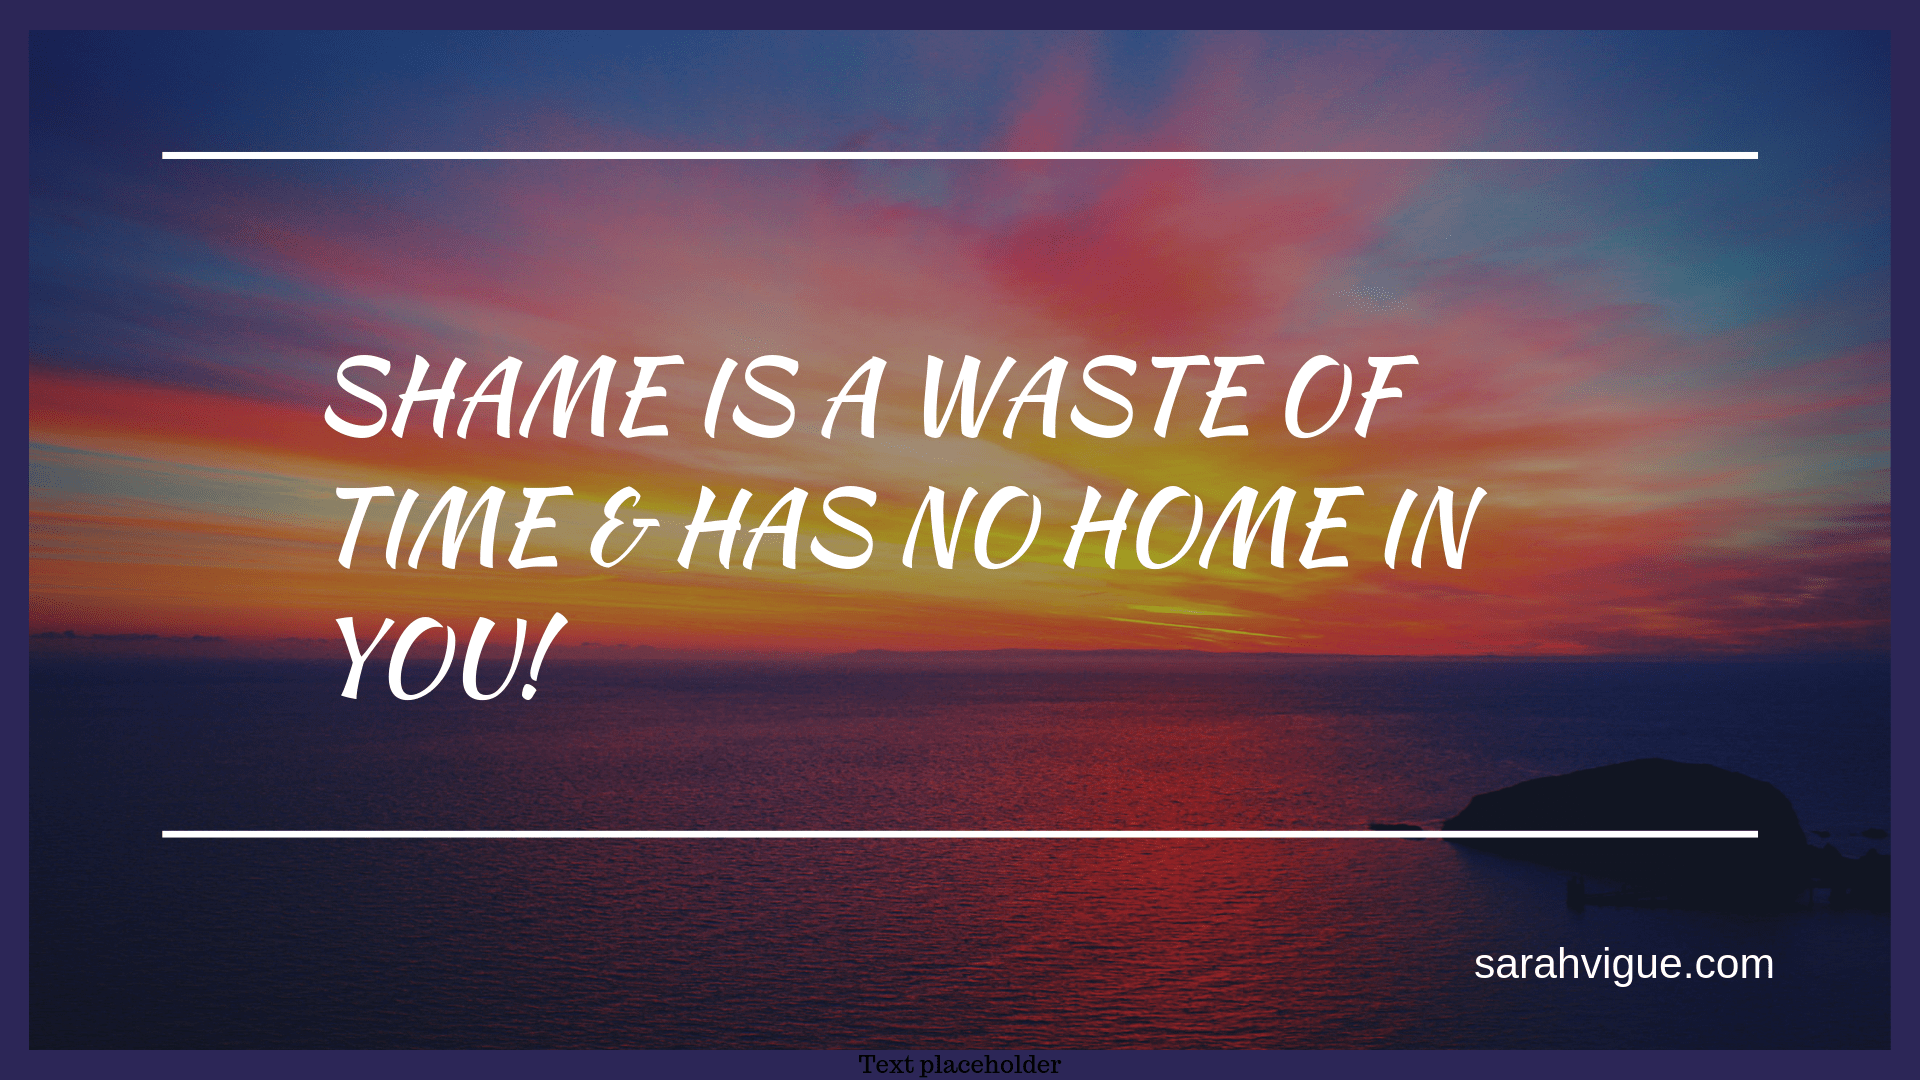 Shame is a waste of time and has no home in you! Sarah Lacey Vigue